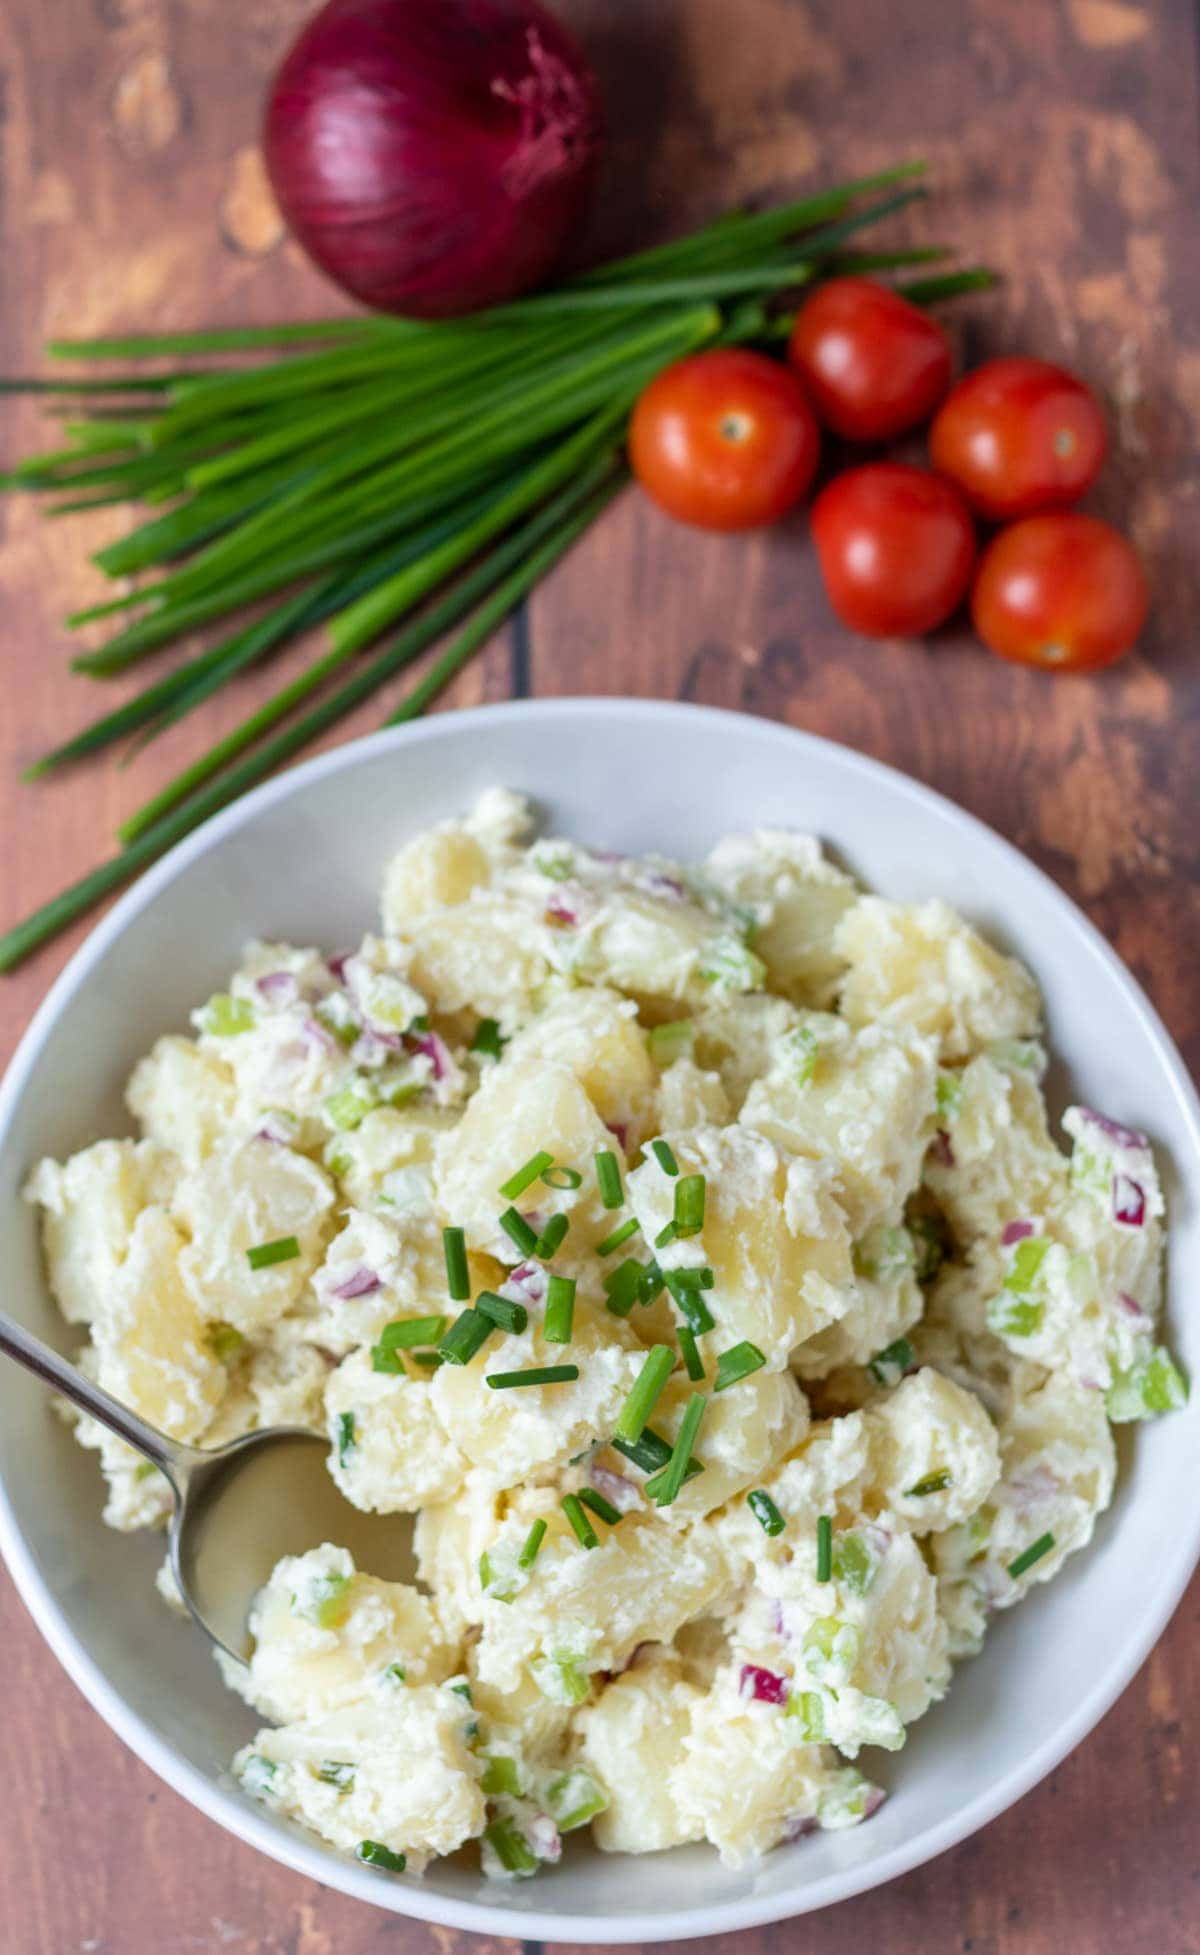 Birds eye view of a bowl of healthy potato salad at the bottom. Chives, cherry tomatoes and a red onion at the top.